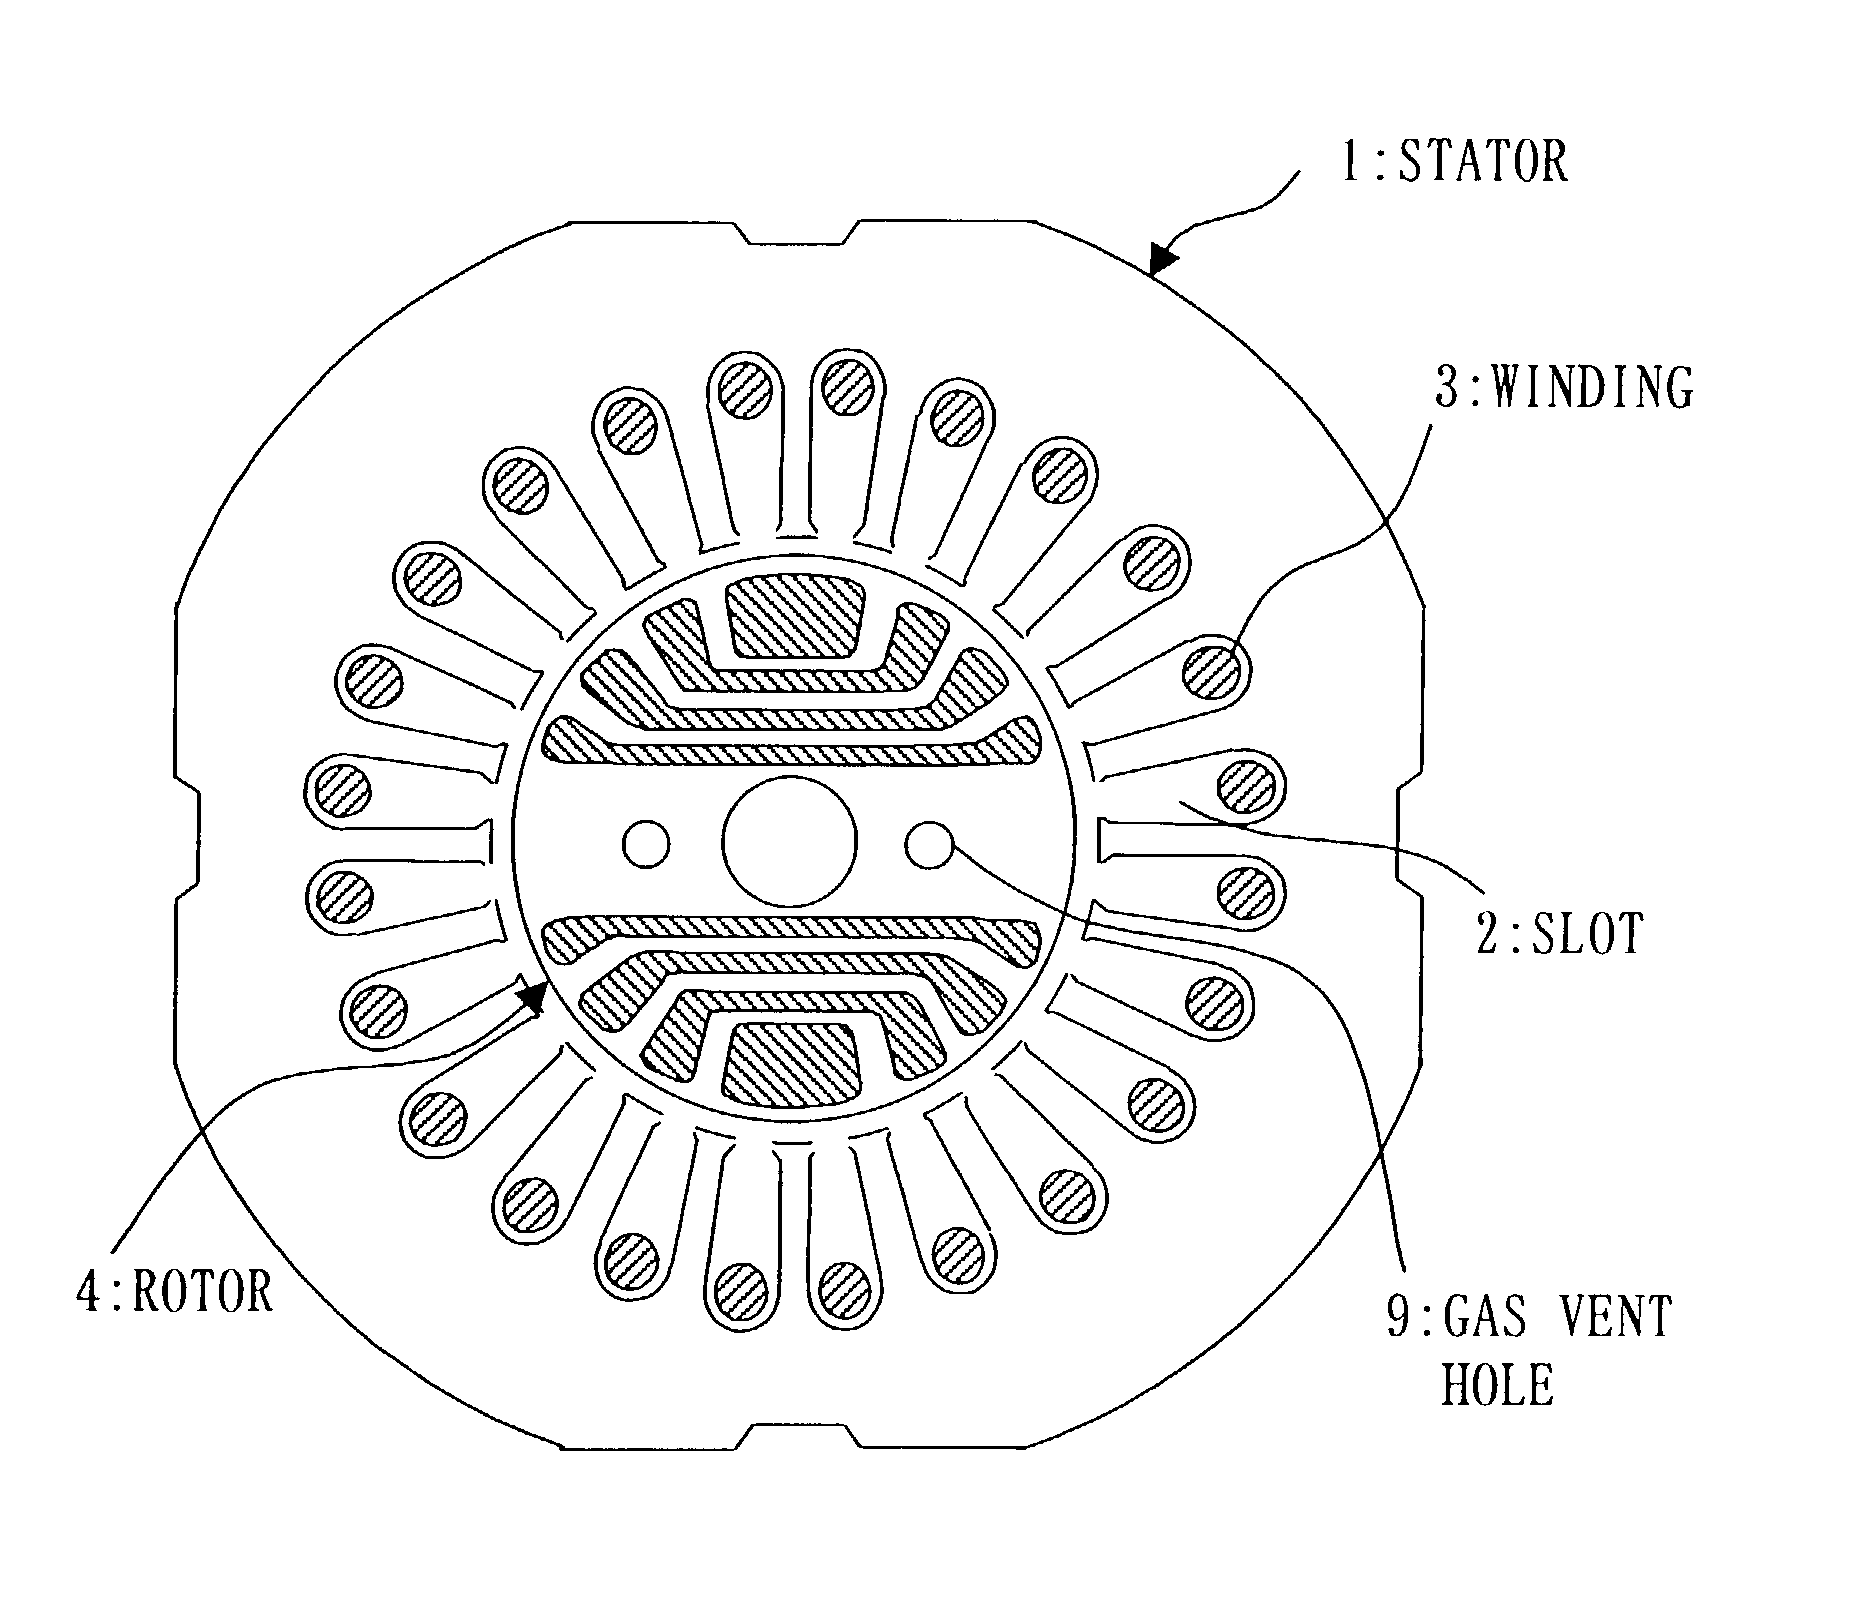 Rotor of a synchronous induction electric motor